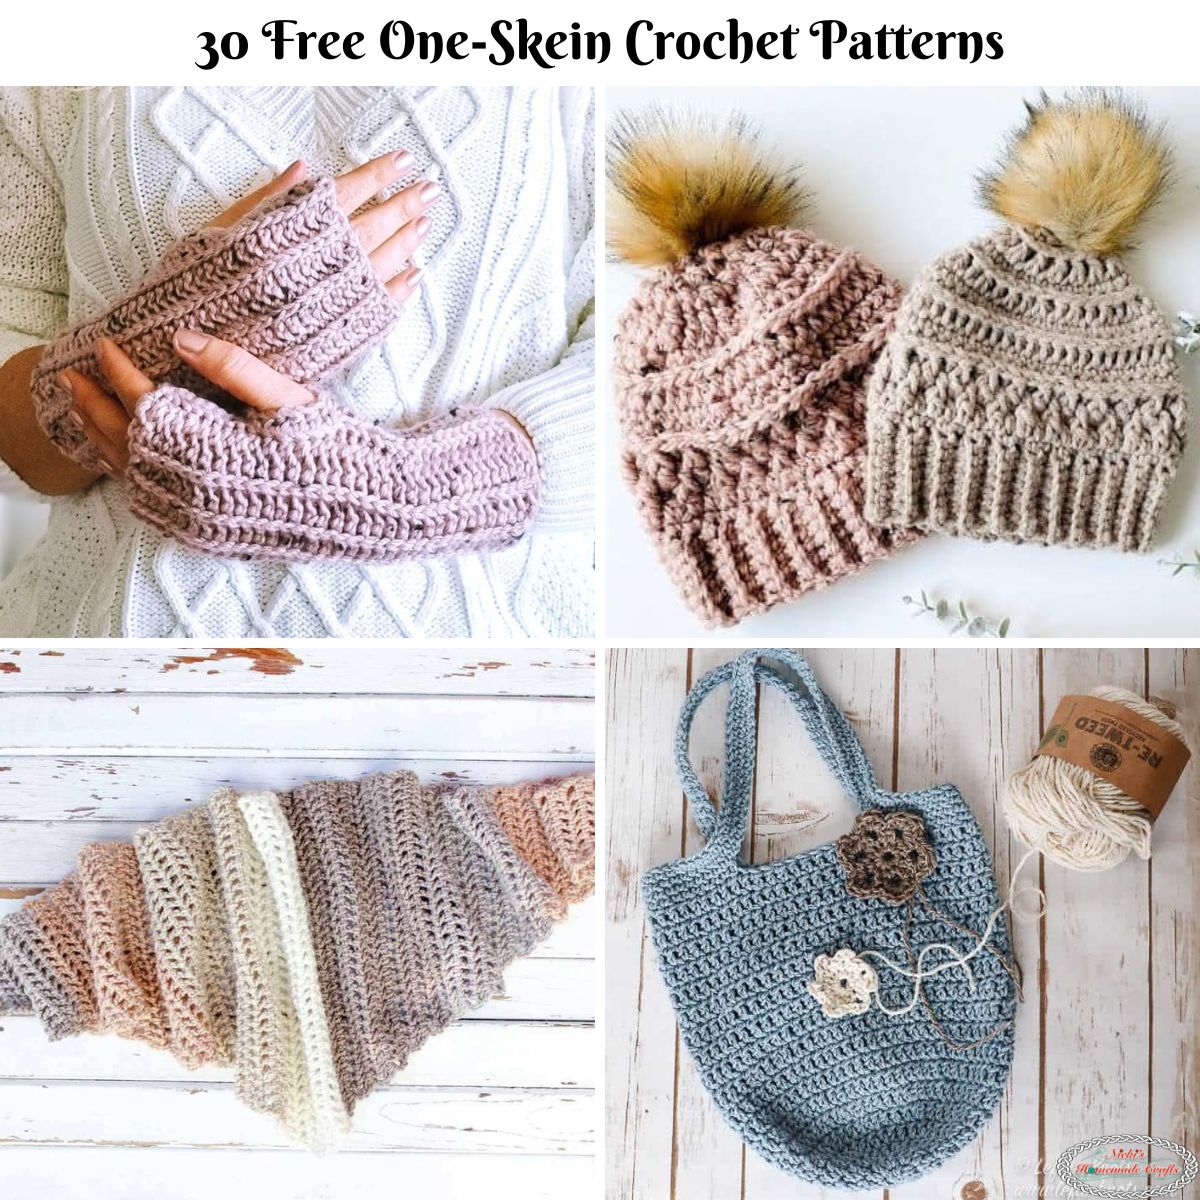 24 Great Things About Quick Crocheted Accessories: 3 Skeins or